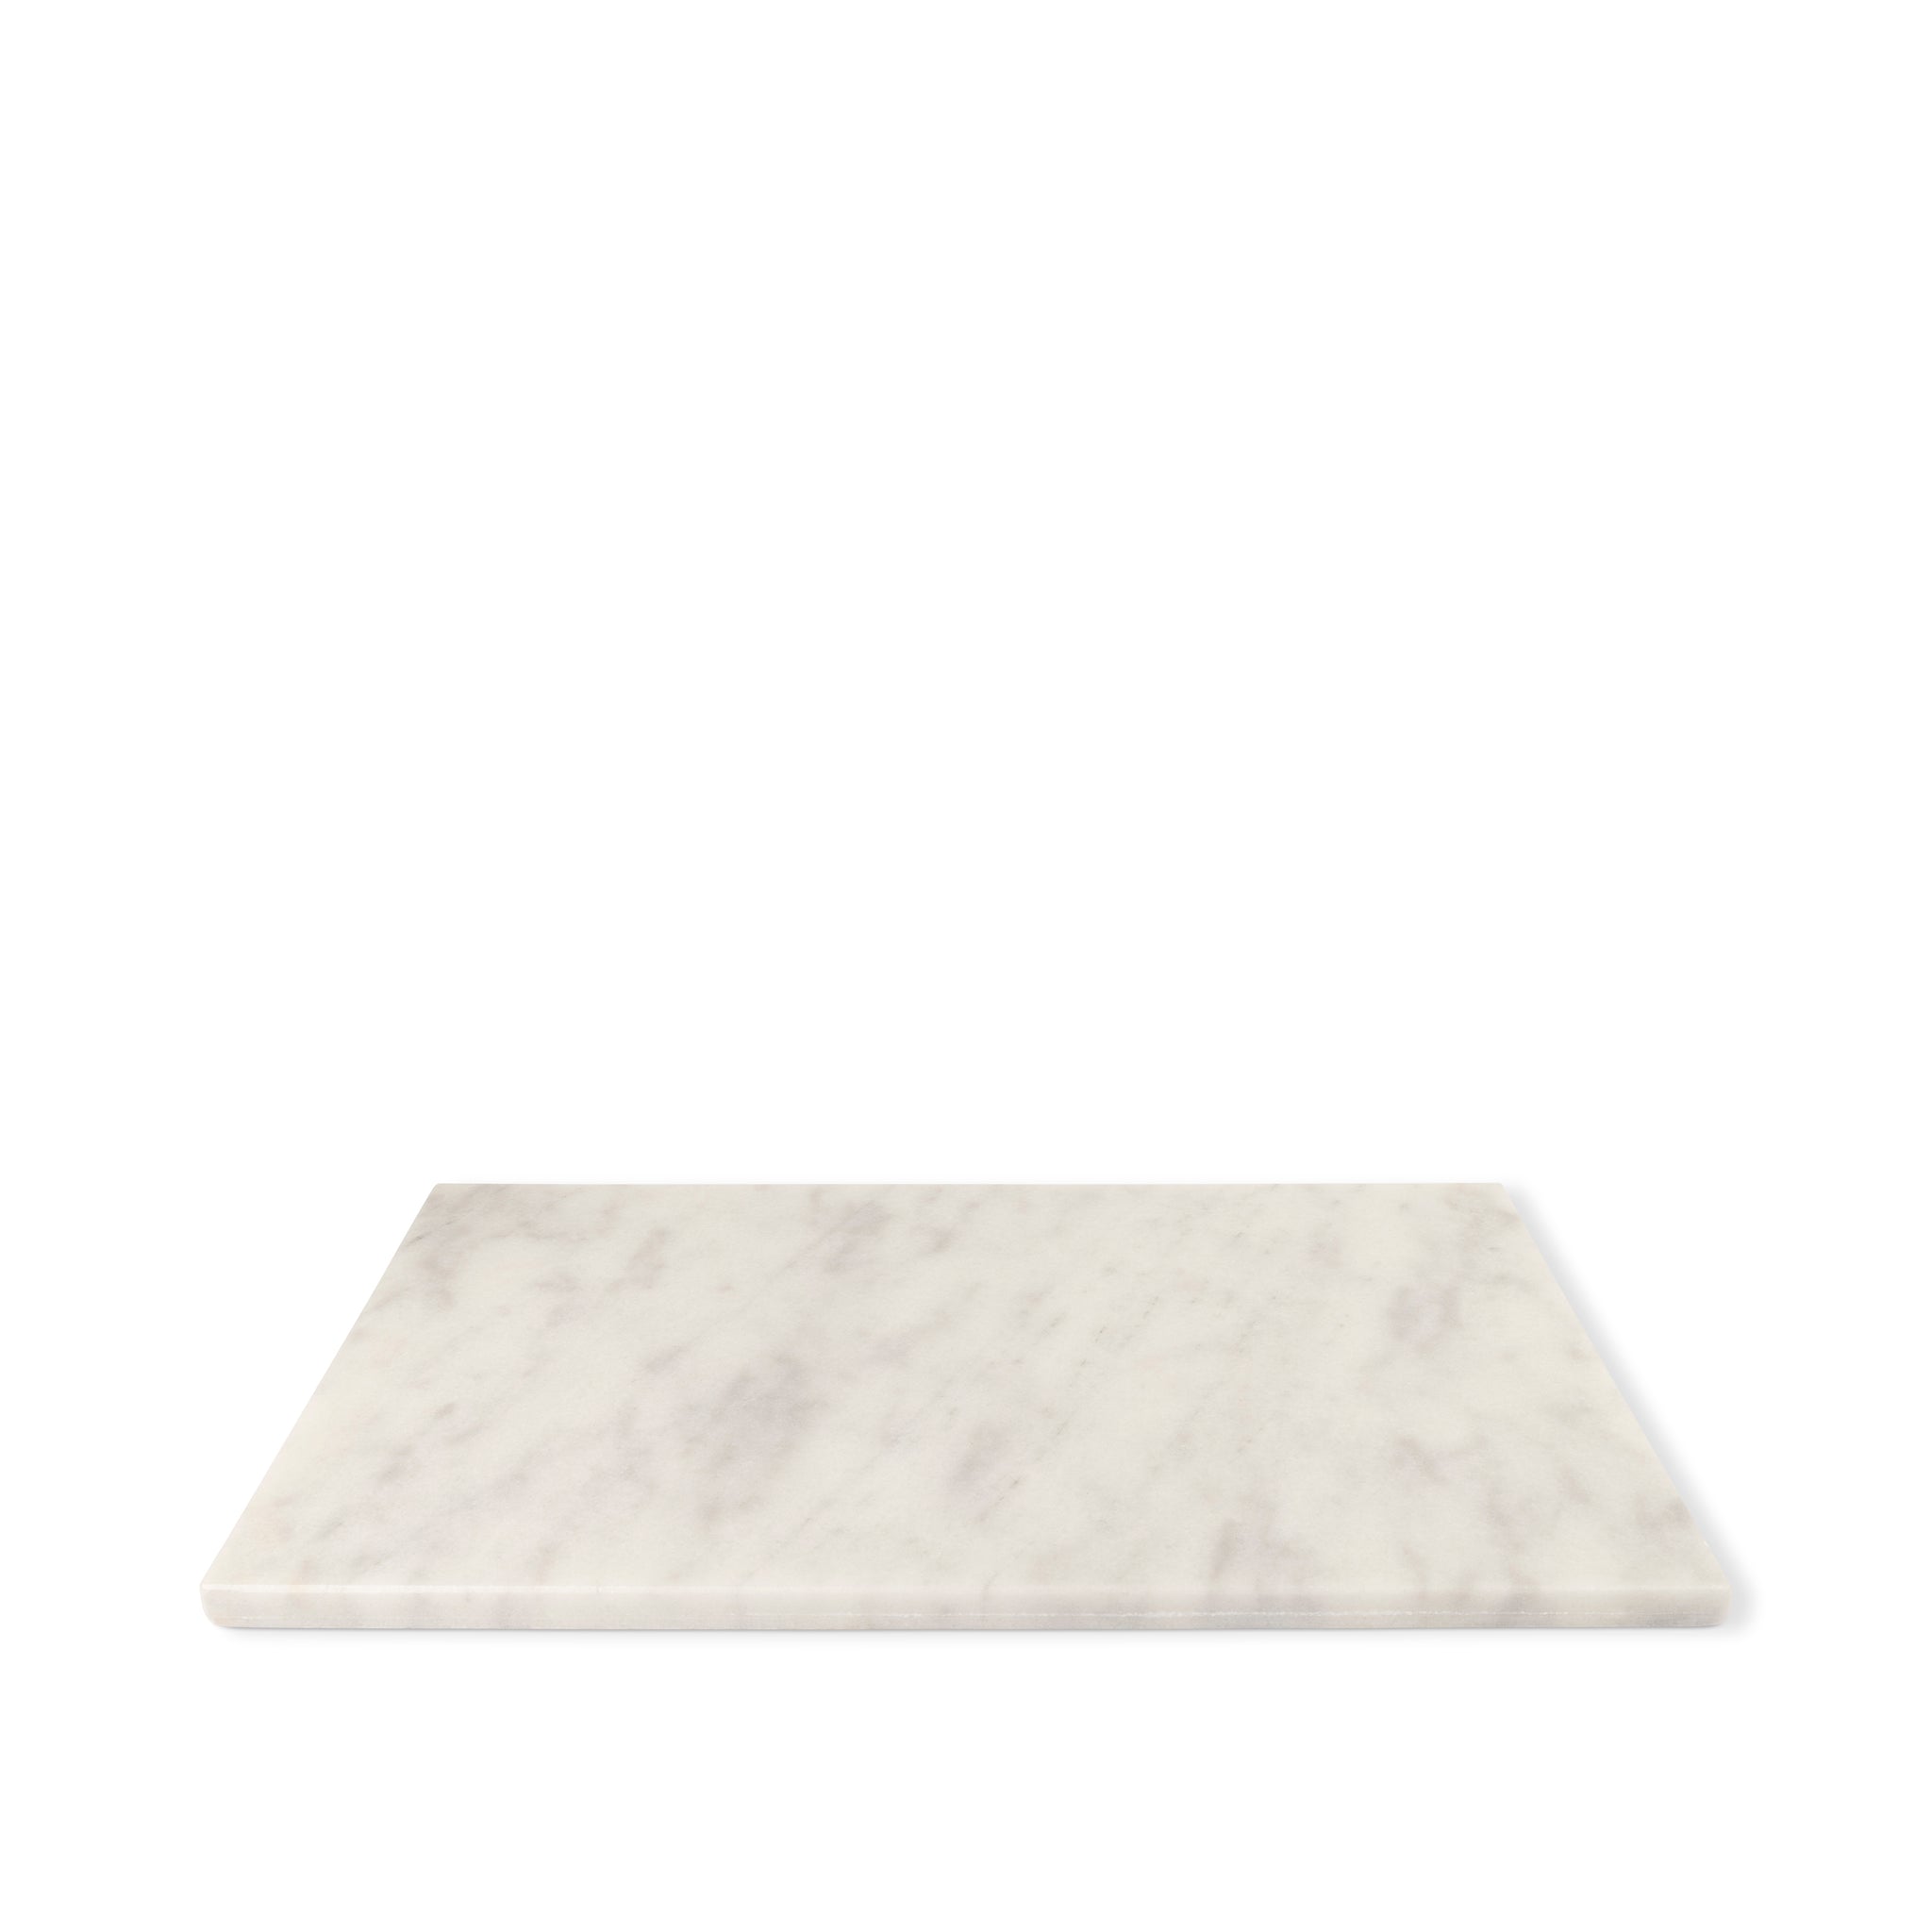 White Marble Rectangular Board XL (pick-up only)